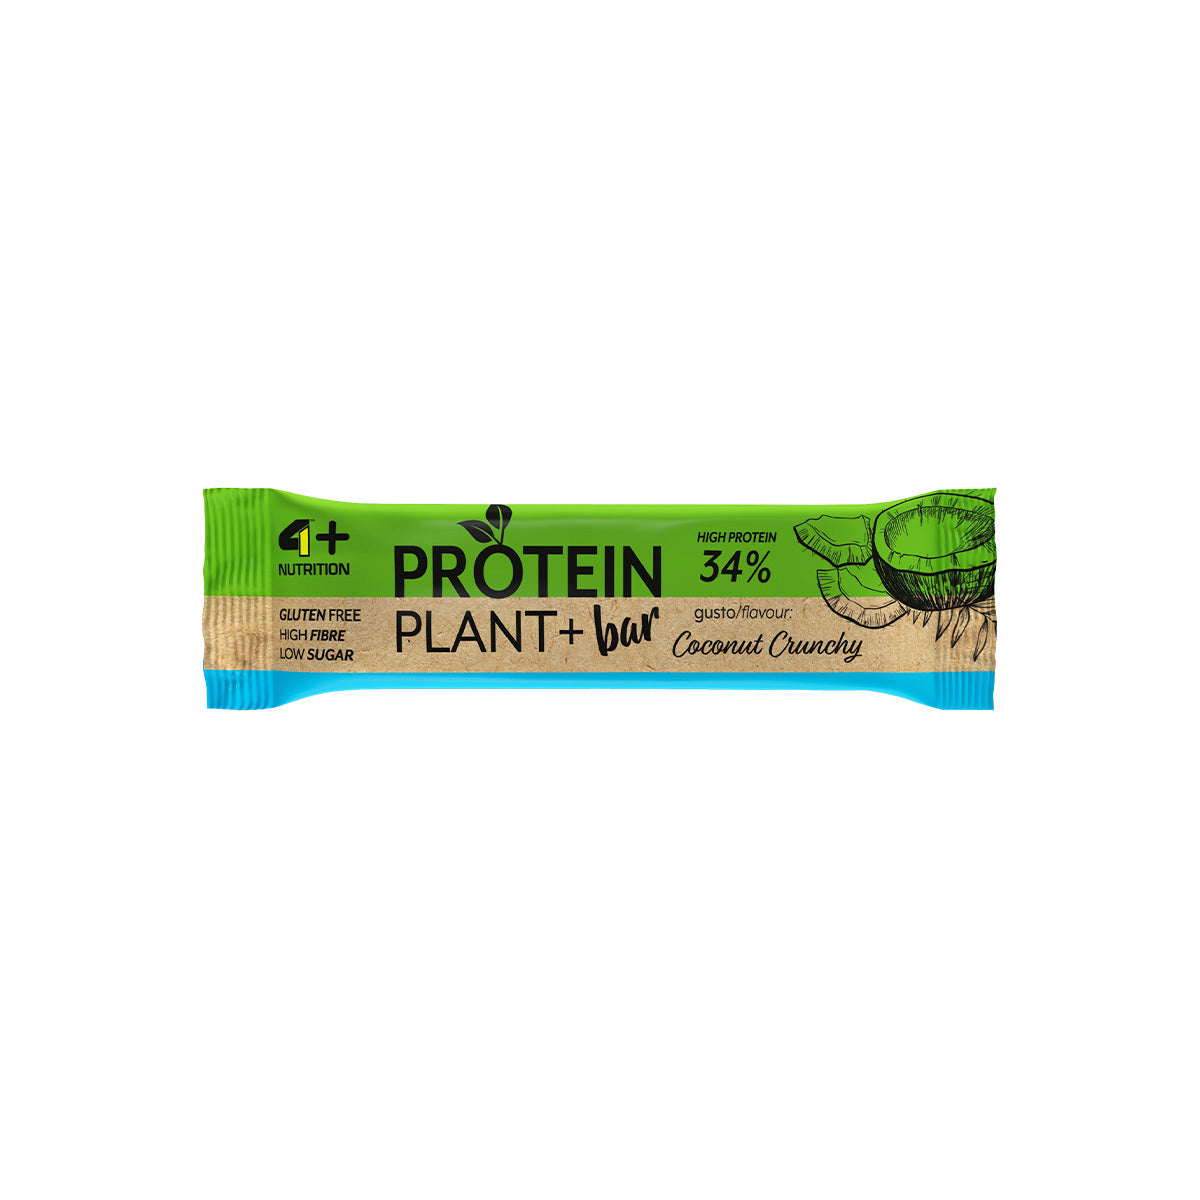 4+ Nutrition PLANT + Protein Bar